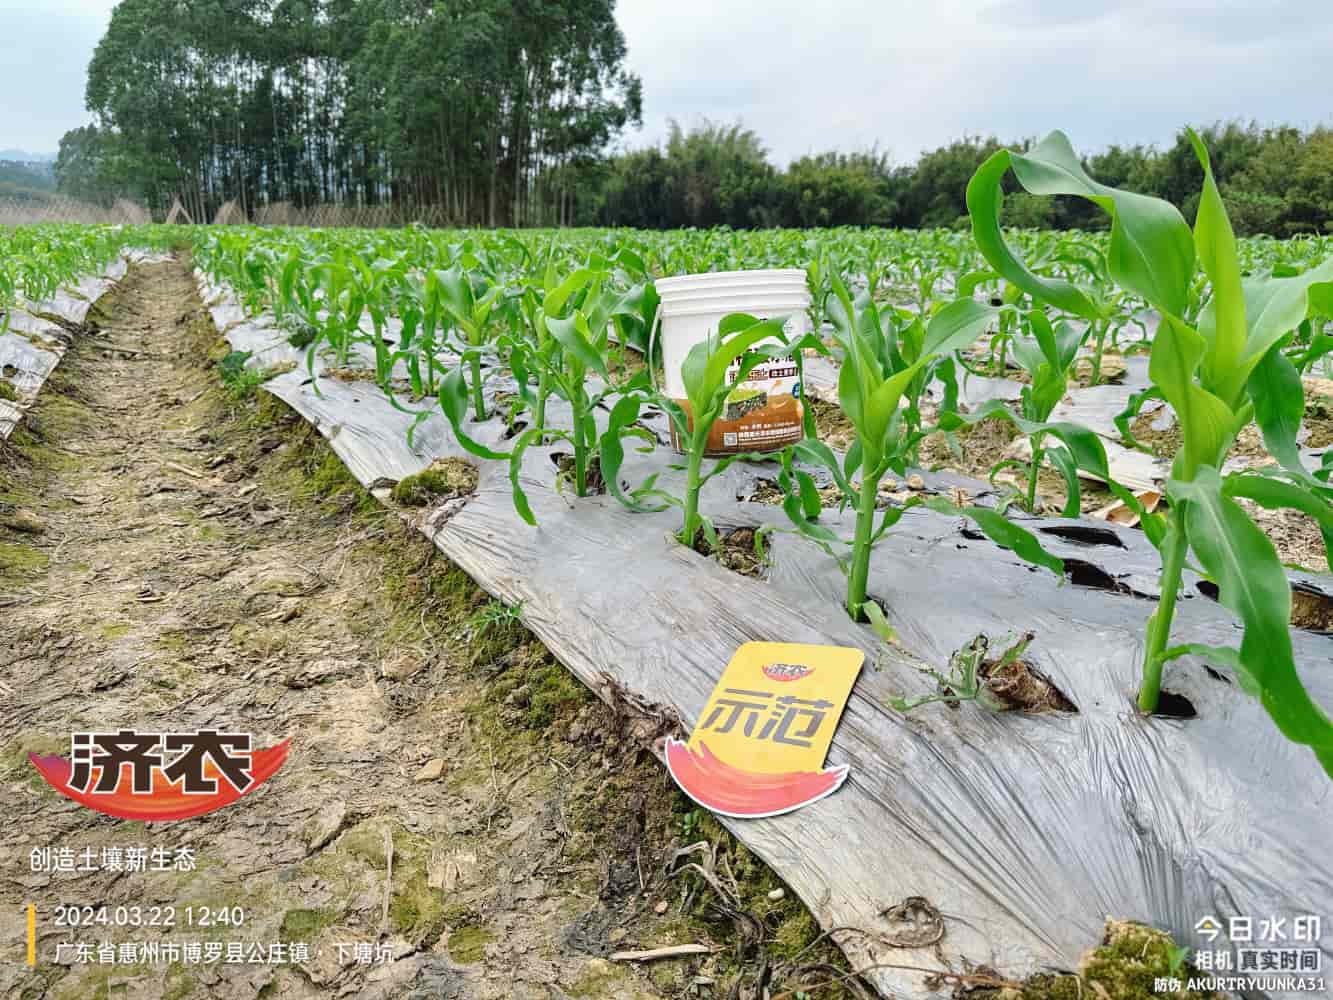 The effect of using agricultural products in Guangdong corn(图3)